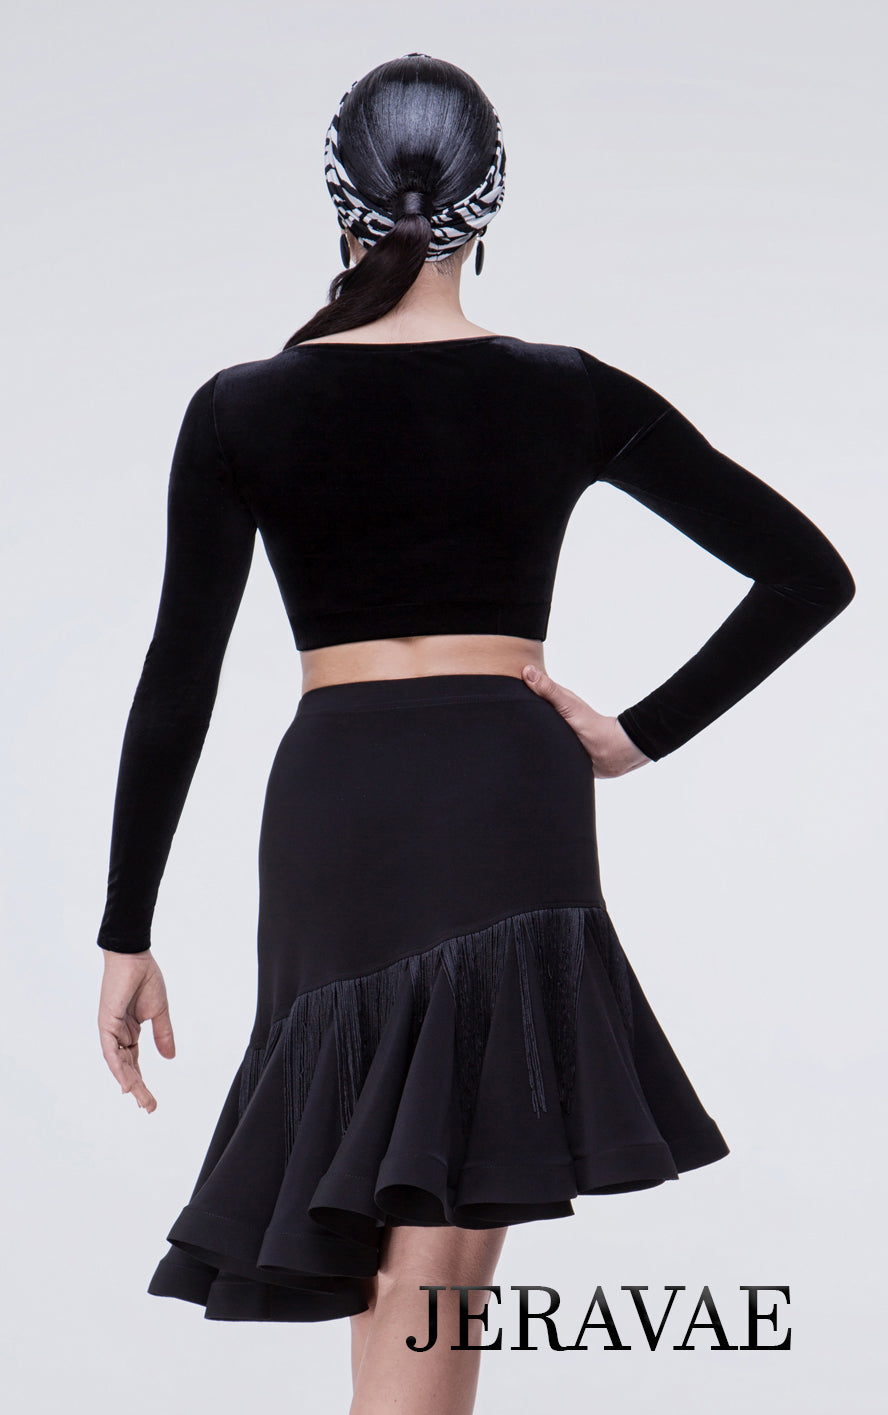 Full Latin Practice Skirt with Wrapped Horsehair Hem, Rouched Front. and Fringe Trim at Skirt PRA 634